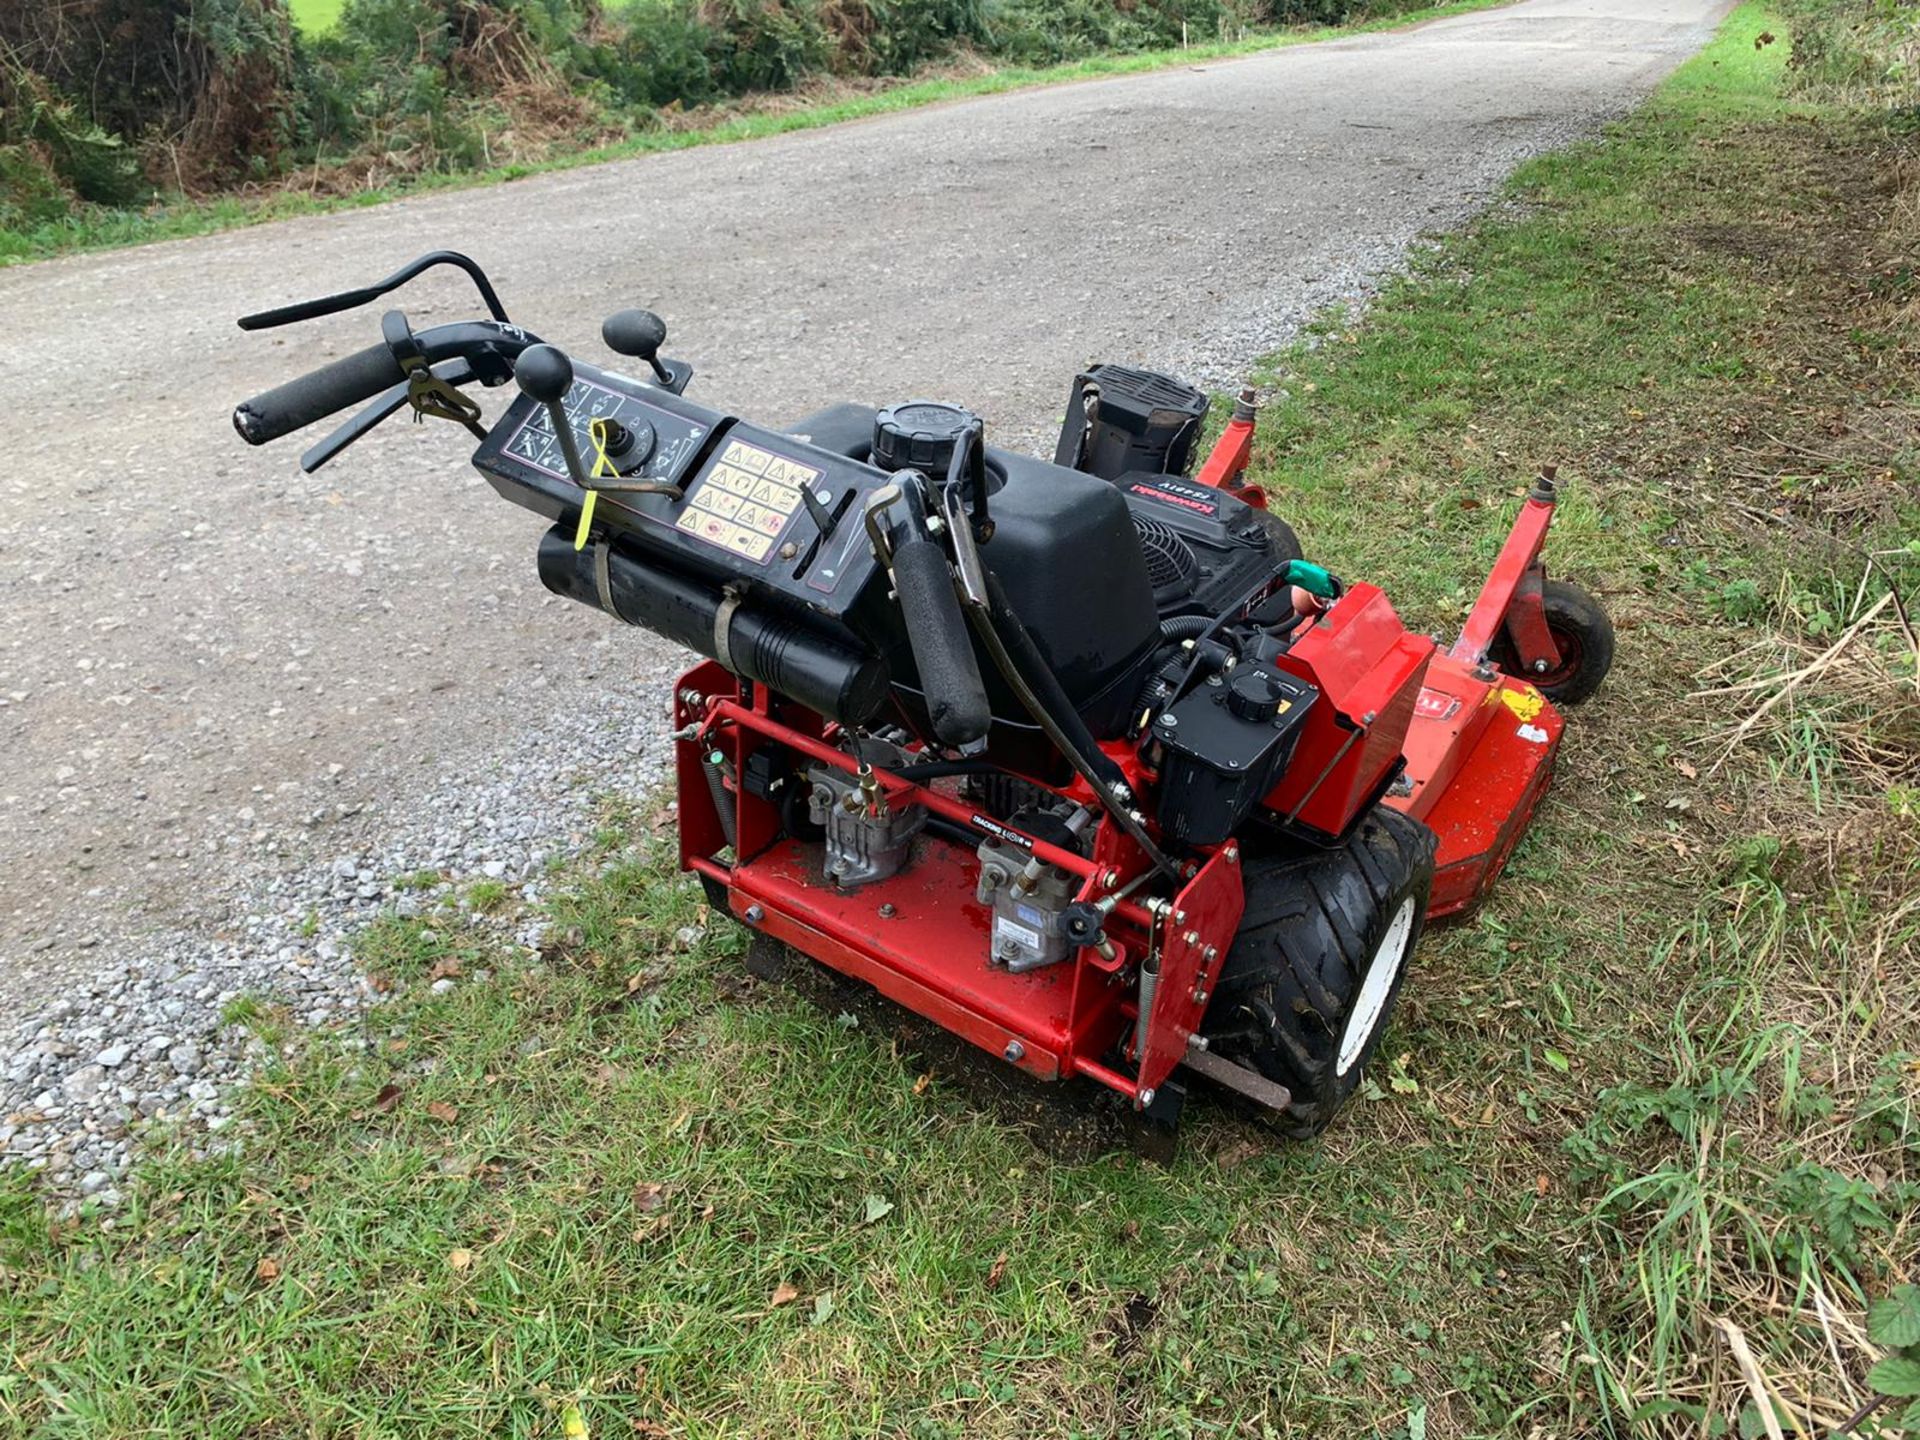 TORO 36" WALK BEHIND PEDESTRIAN MOWER, RUNS DRIVES AND CUTS WELL, PULL OR ELECTRIC START - Image 5 of 10